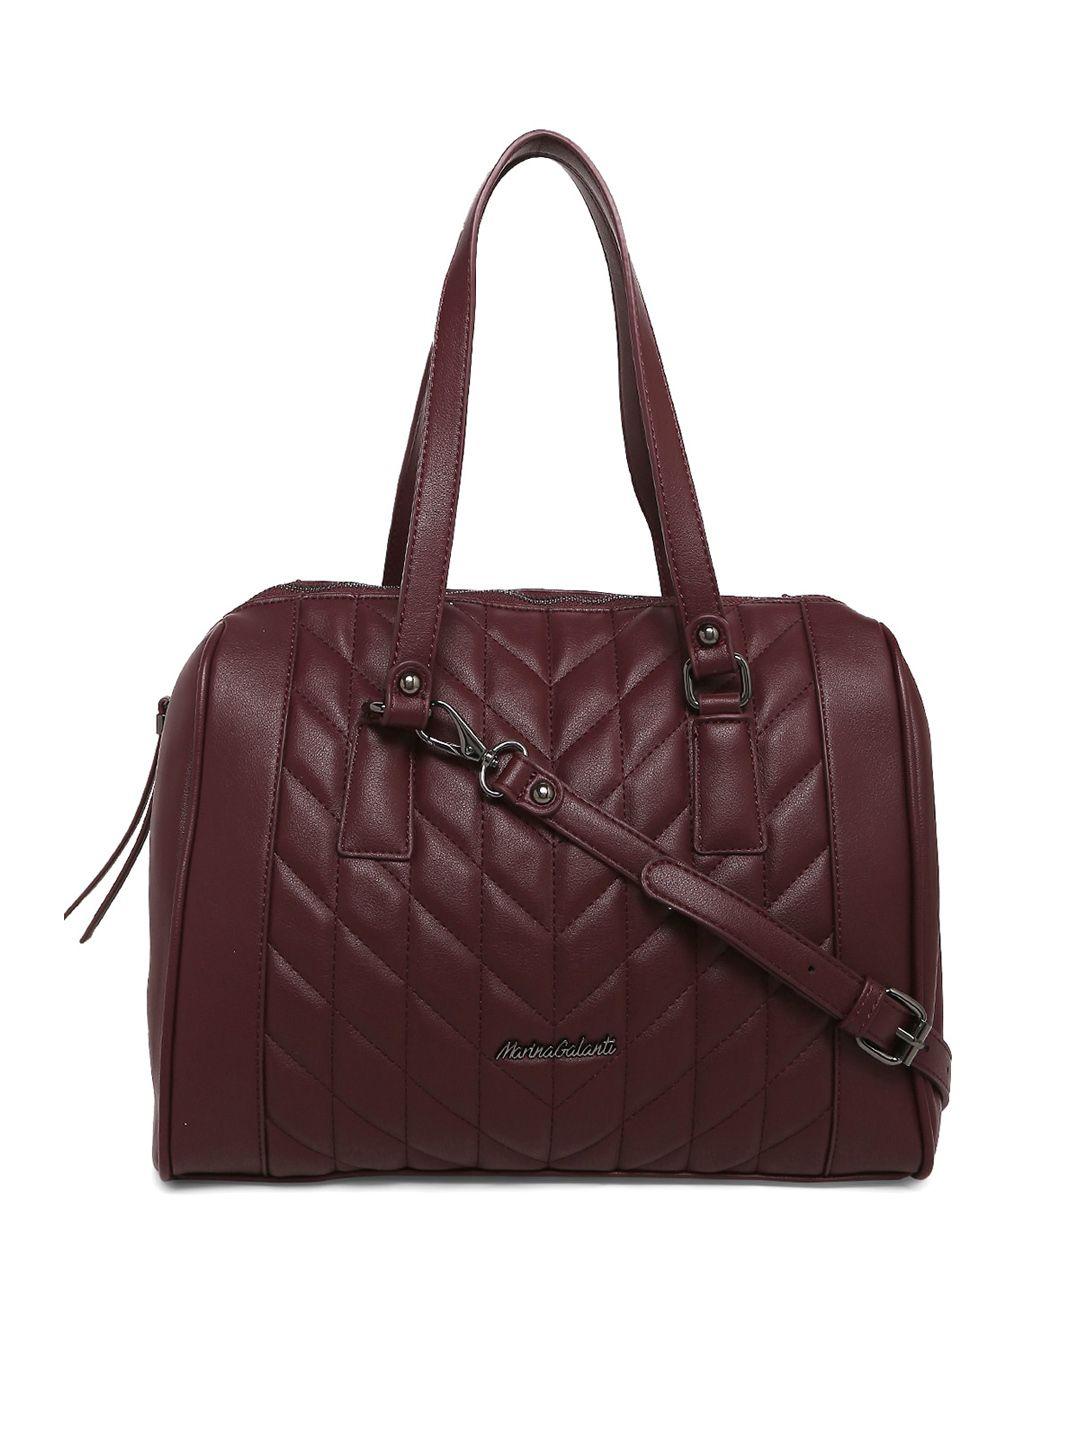 marina galanti maroon textured structured shoulder bag with quilted